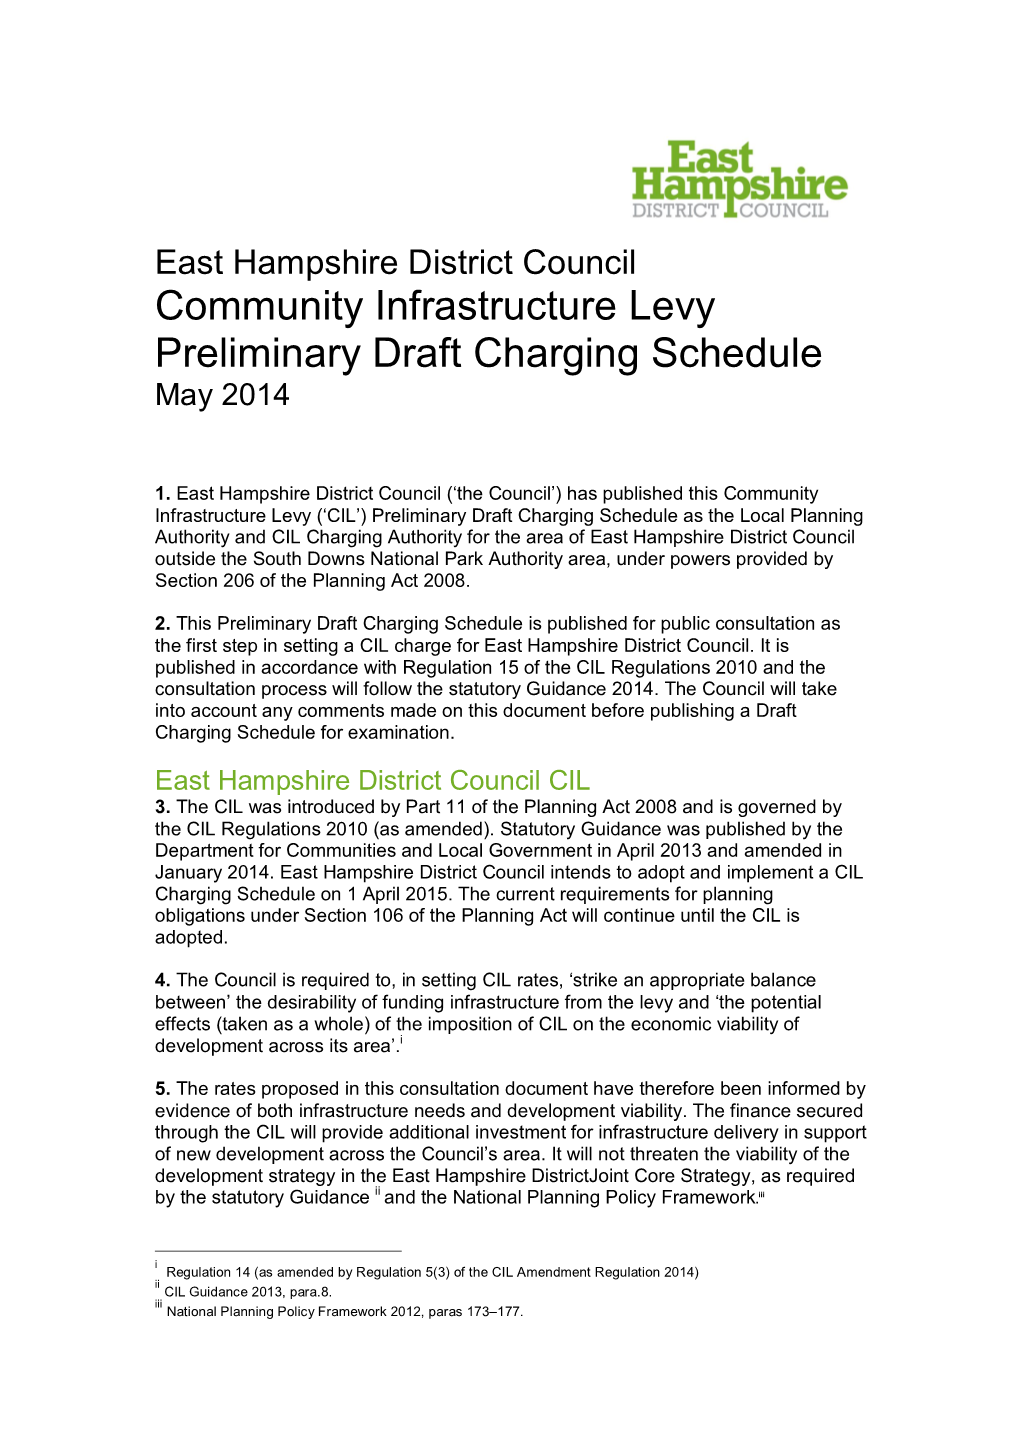 Community Infrastructure Levy Preliminary Draft Charging Schedule May 2014